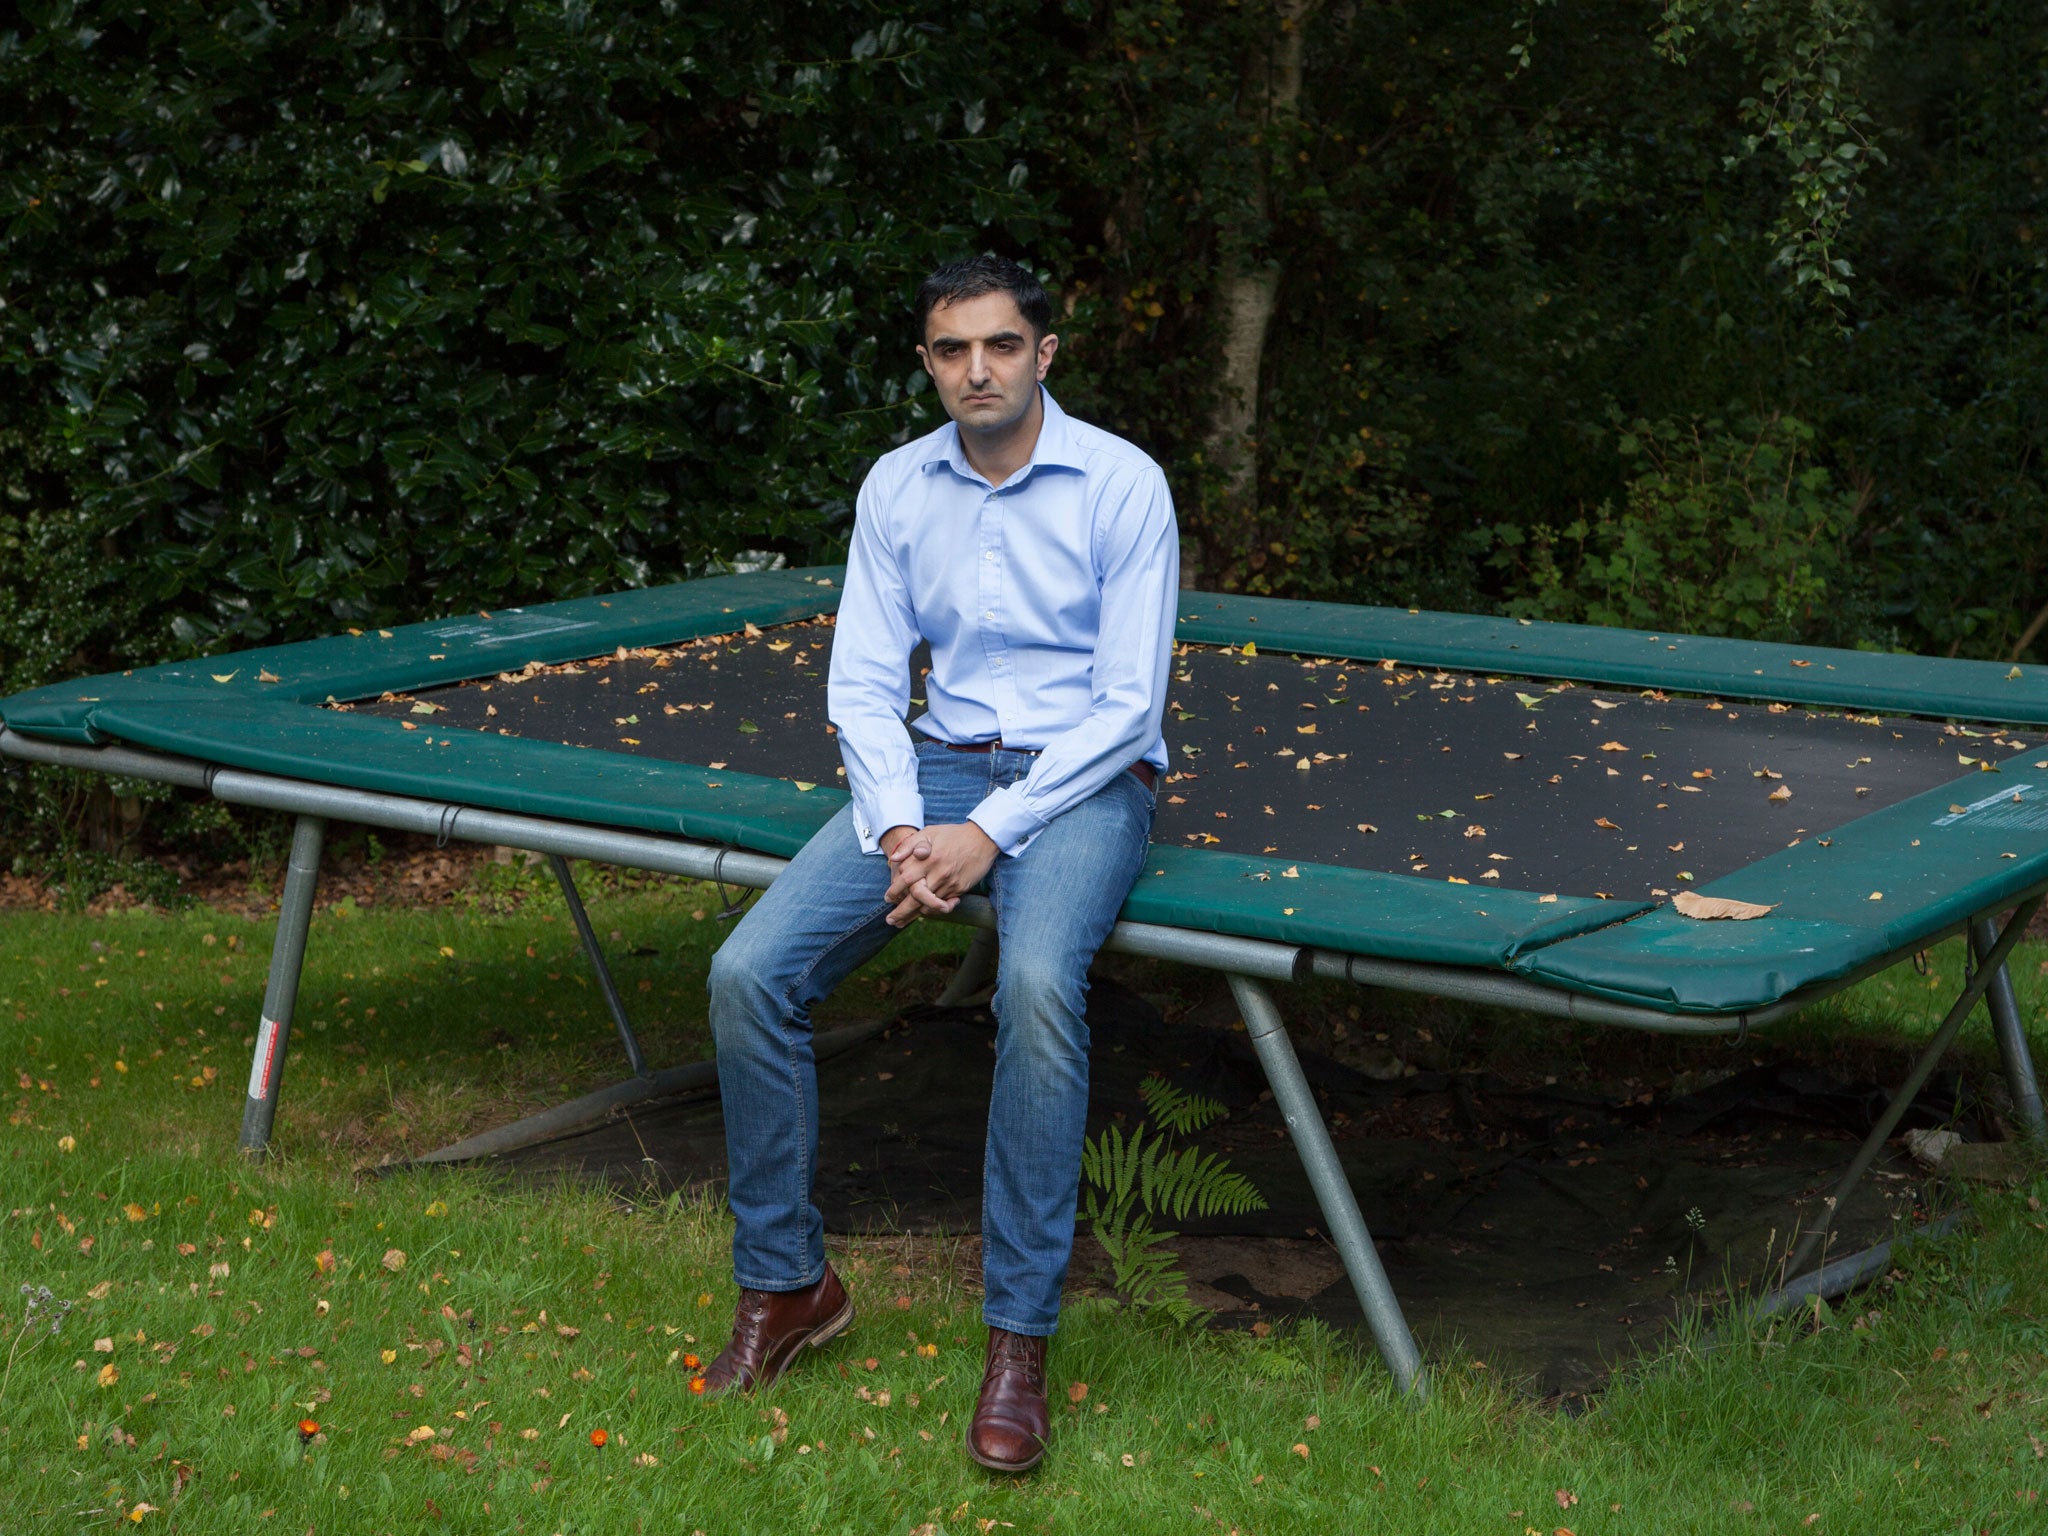 While he was born in England, Sahota says he felt many people were 'not from the same place, internally' as him